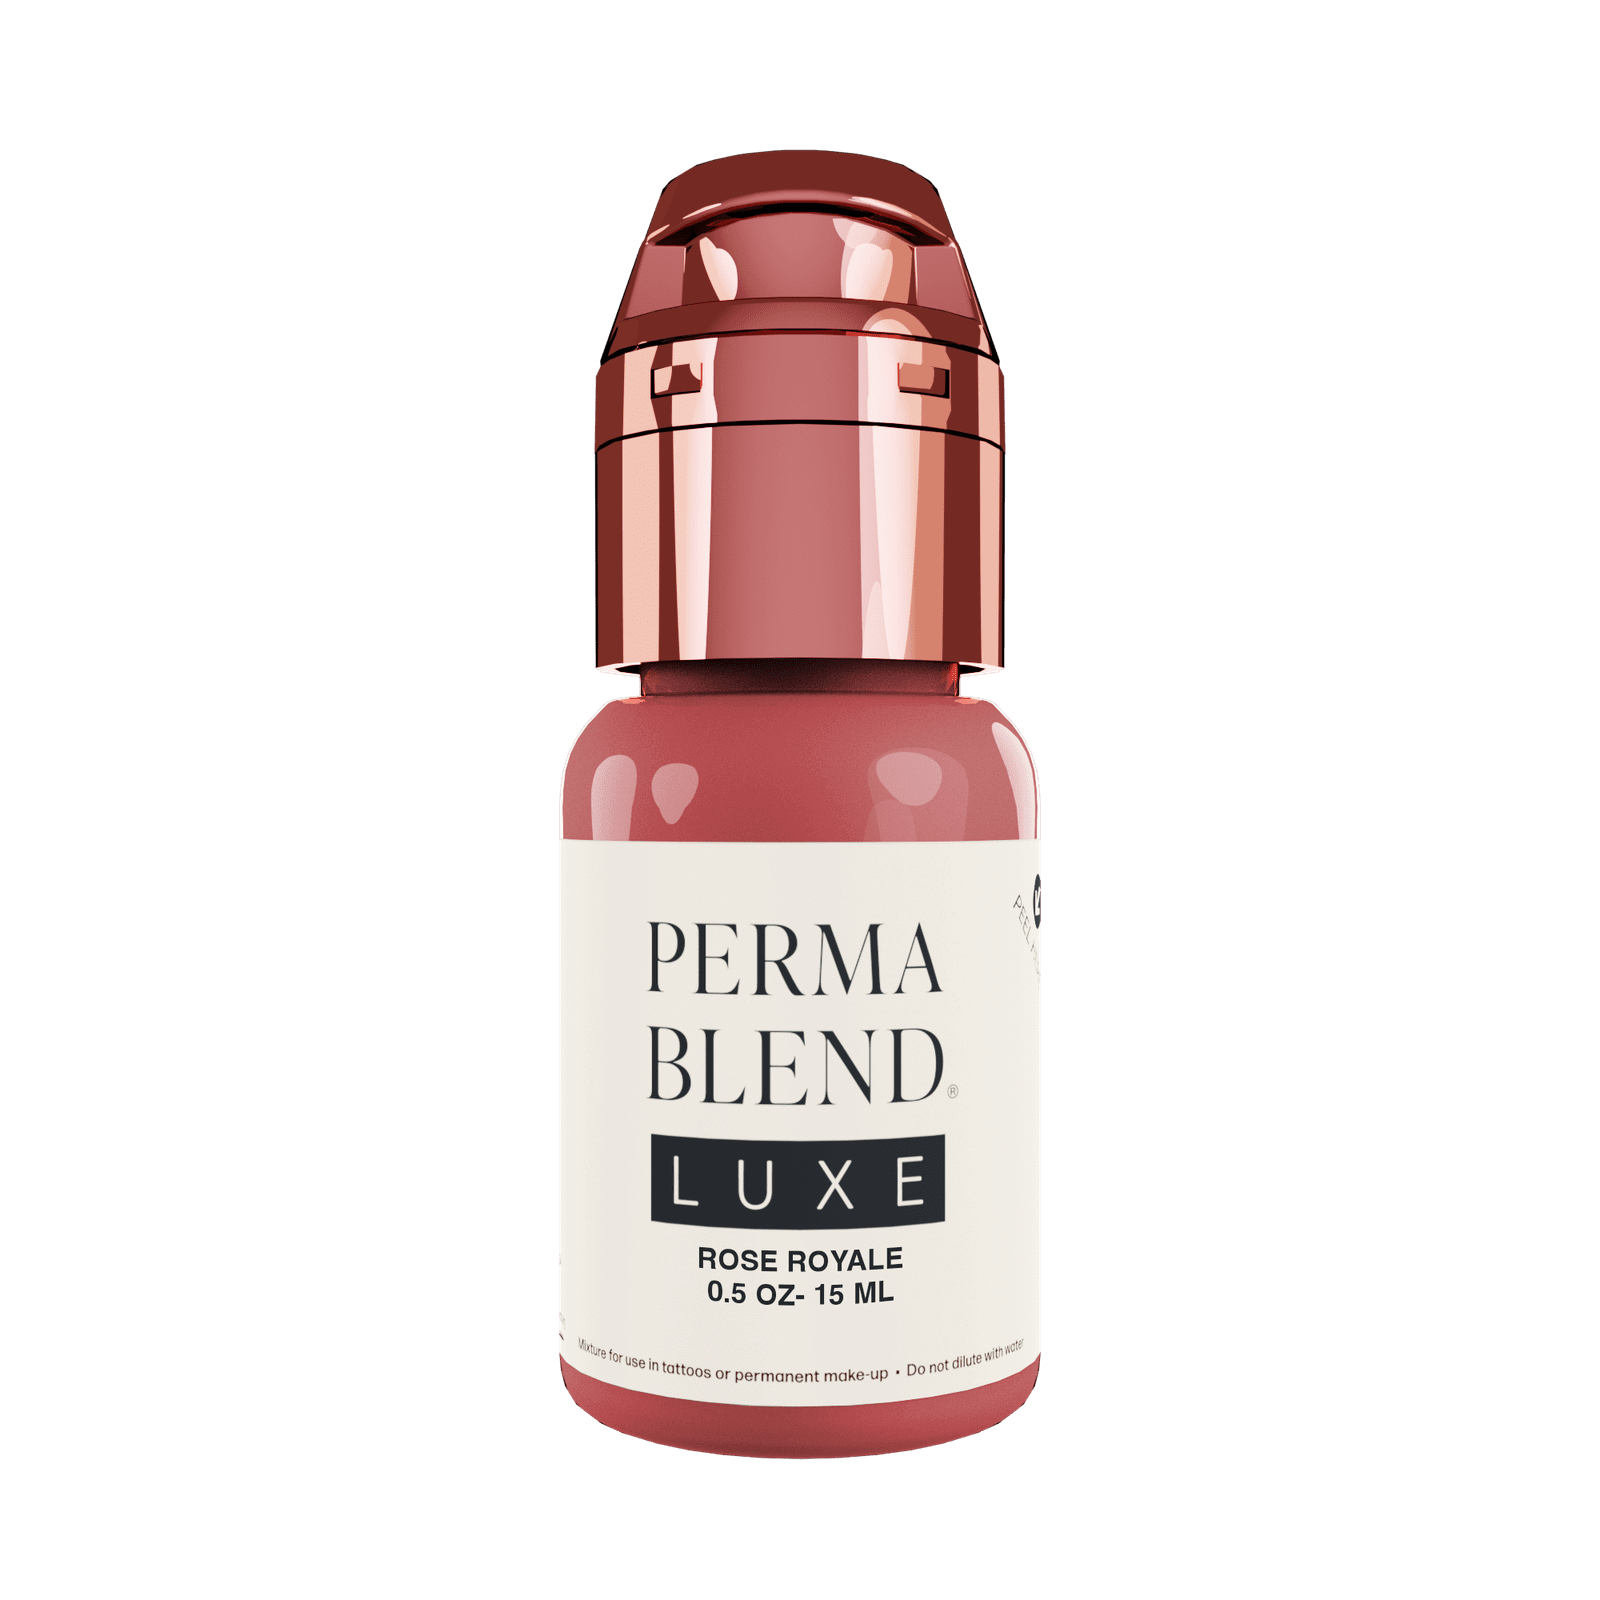 Perma Blend Luxe Rose Royale